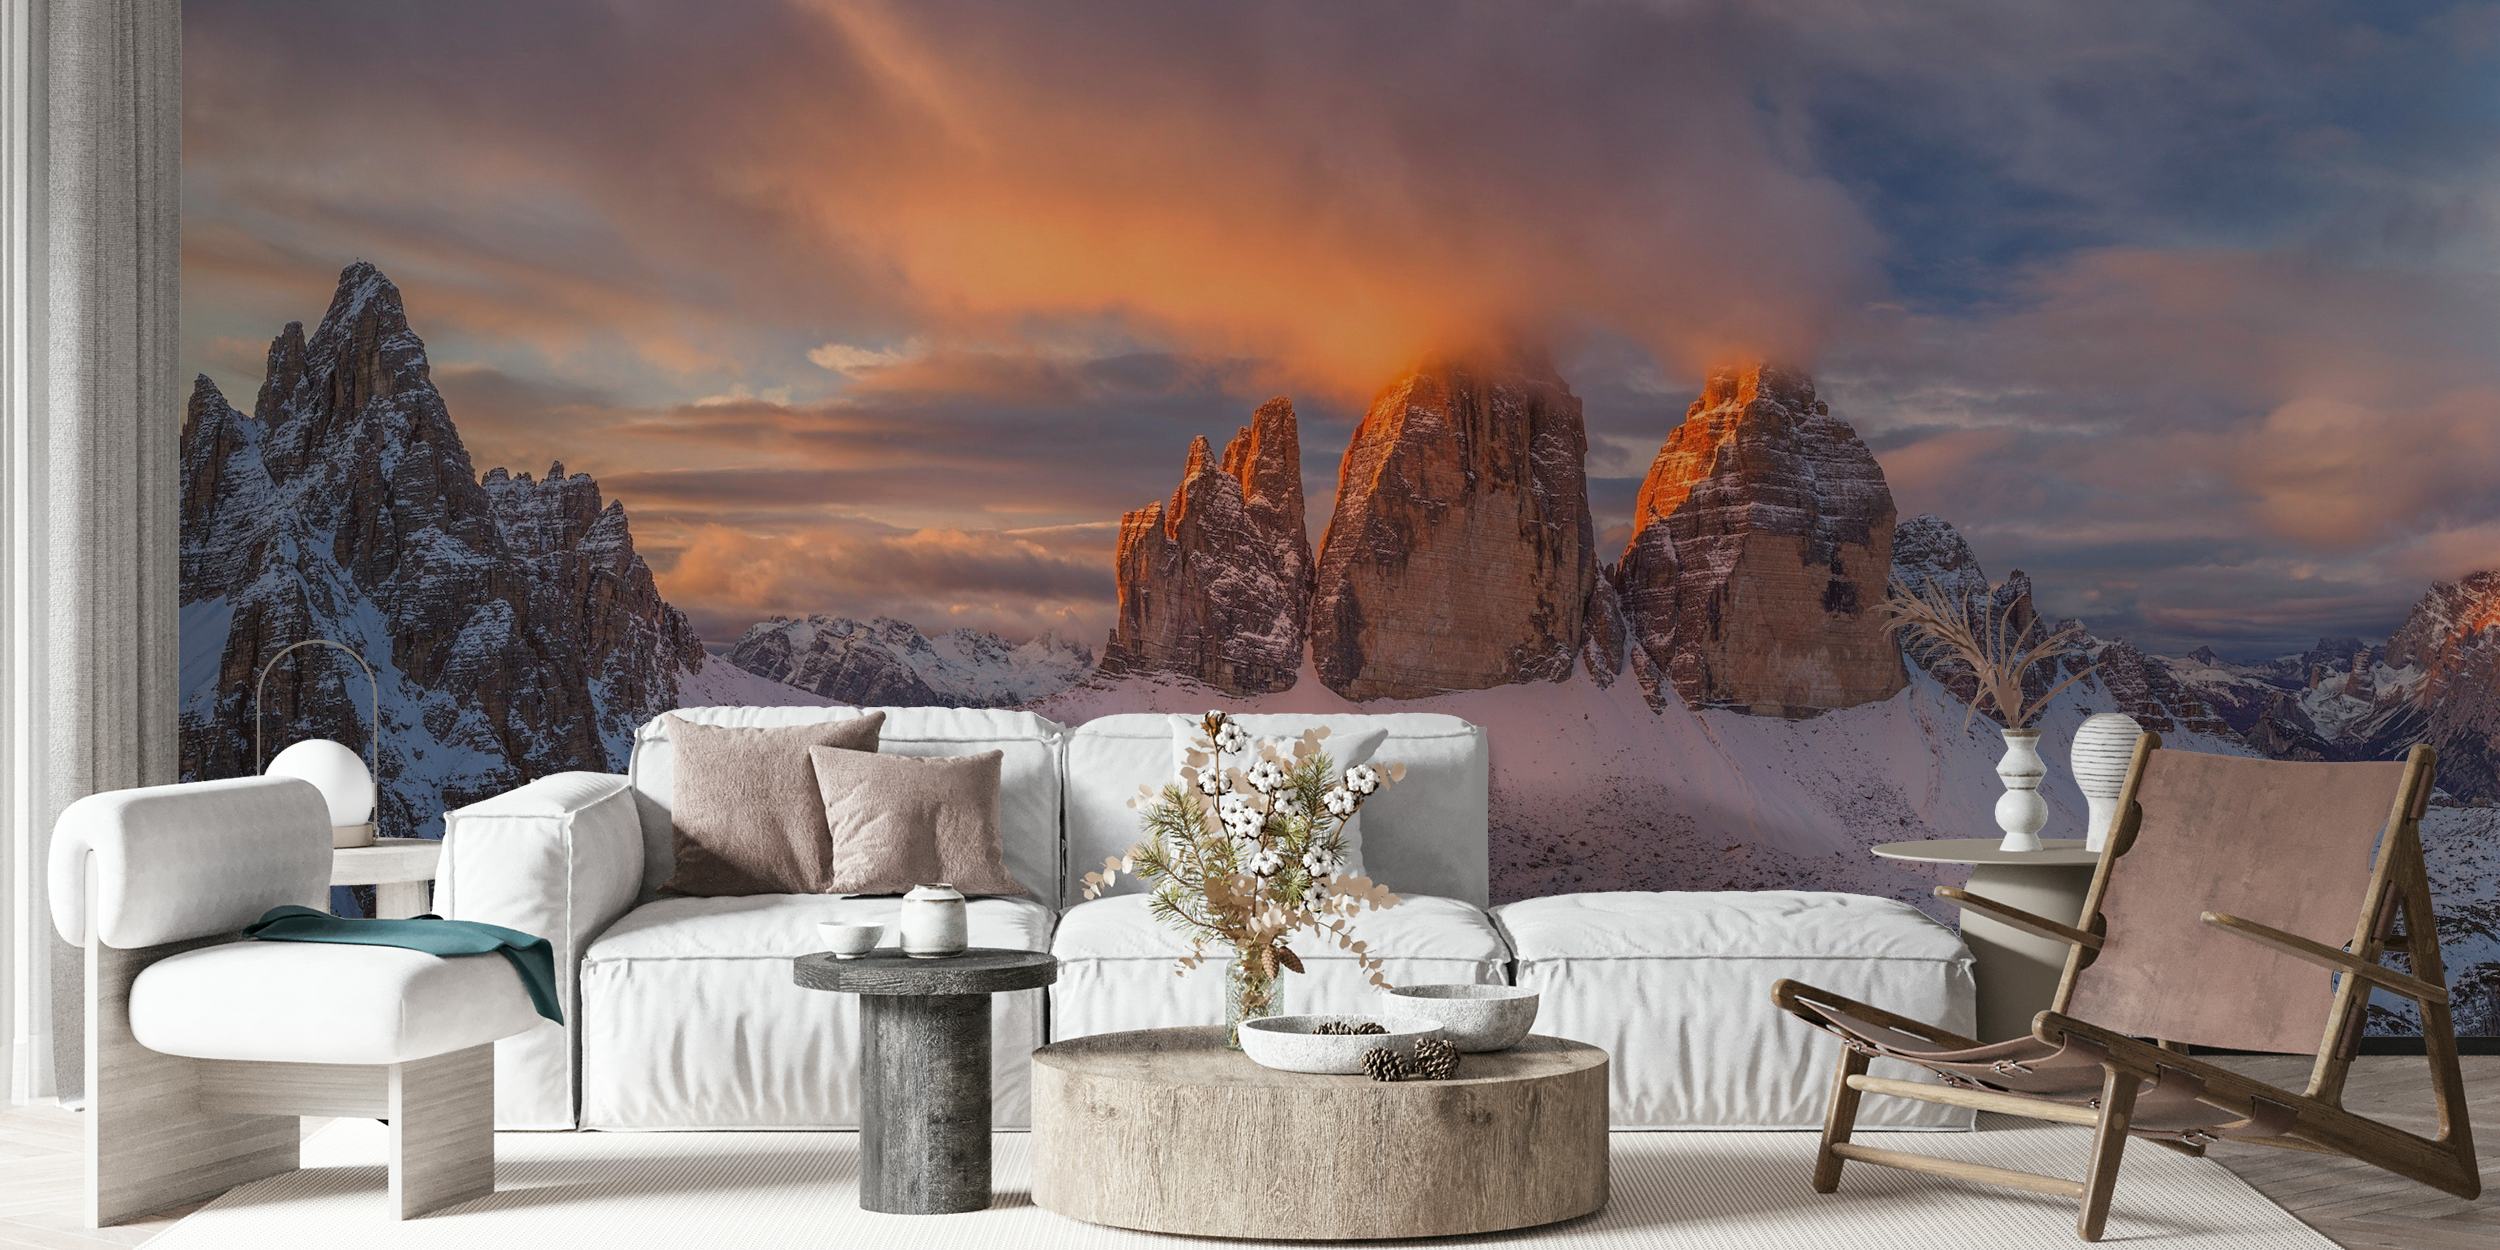 Panoramic wall mural of a sunrise over snowy mountain peaks with vibrant orange and blue sky